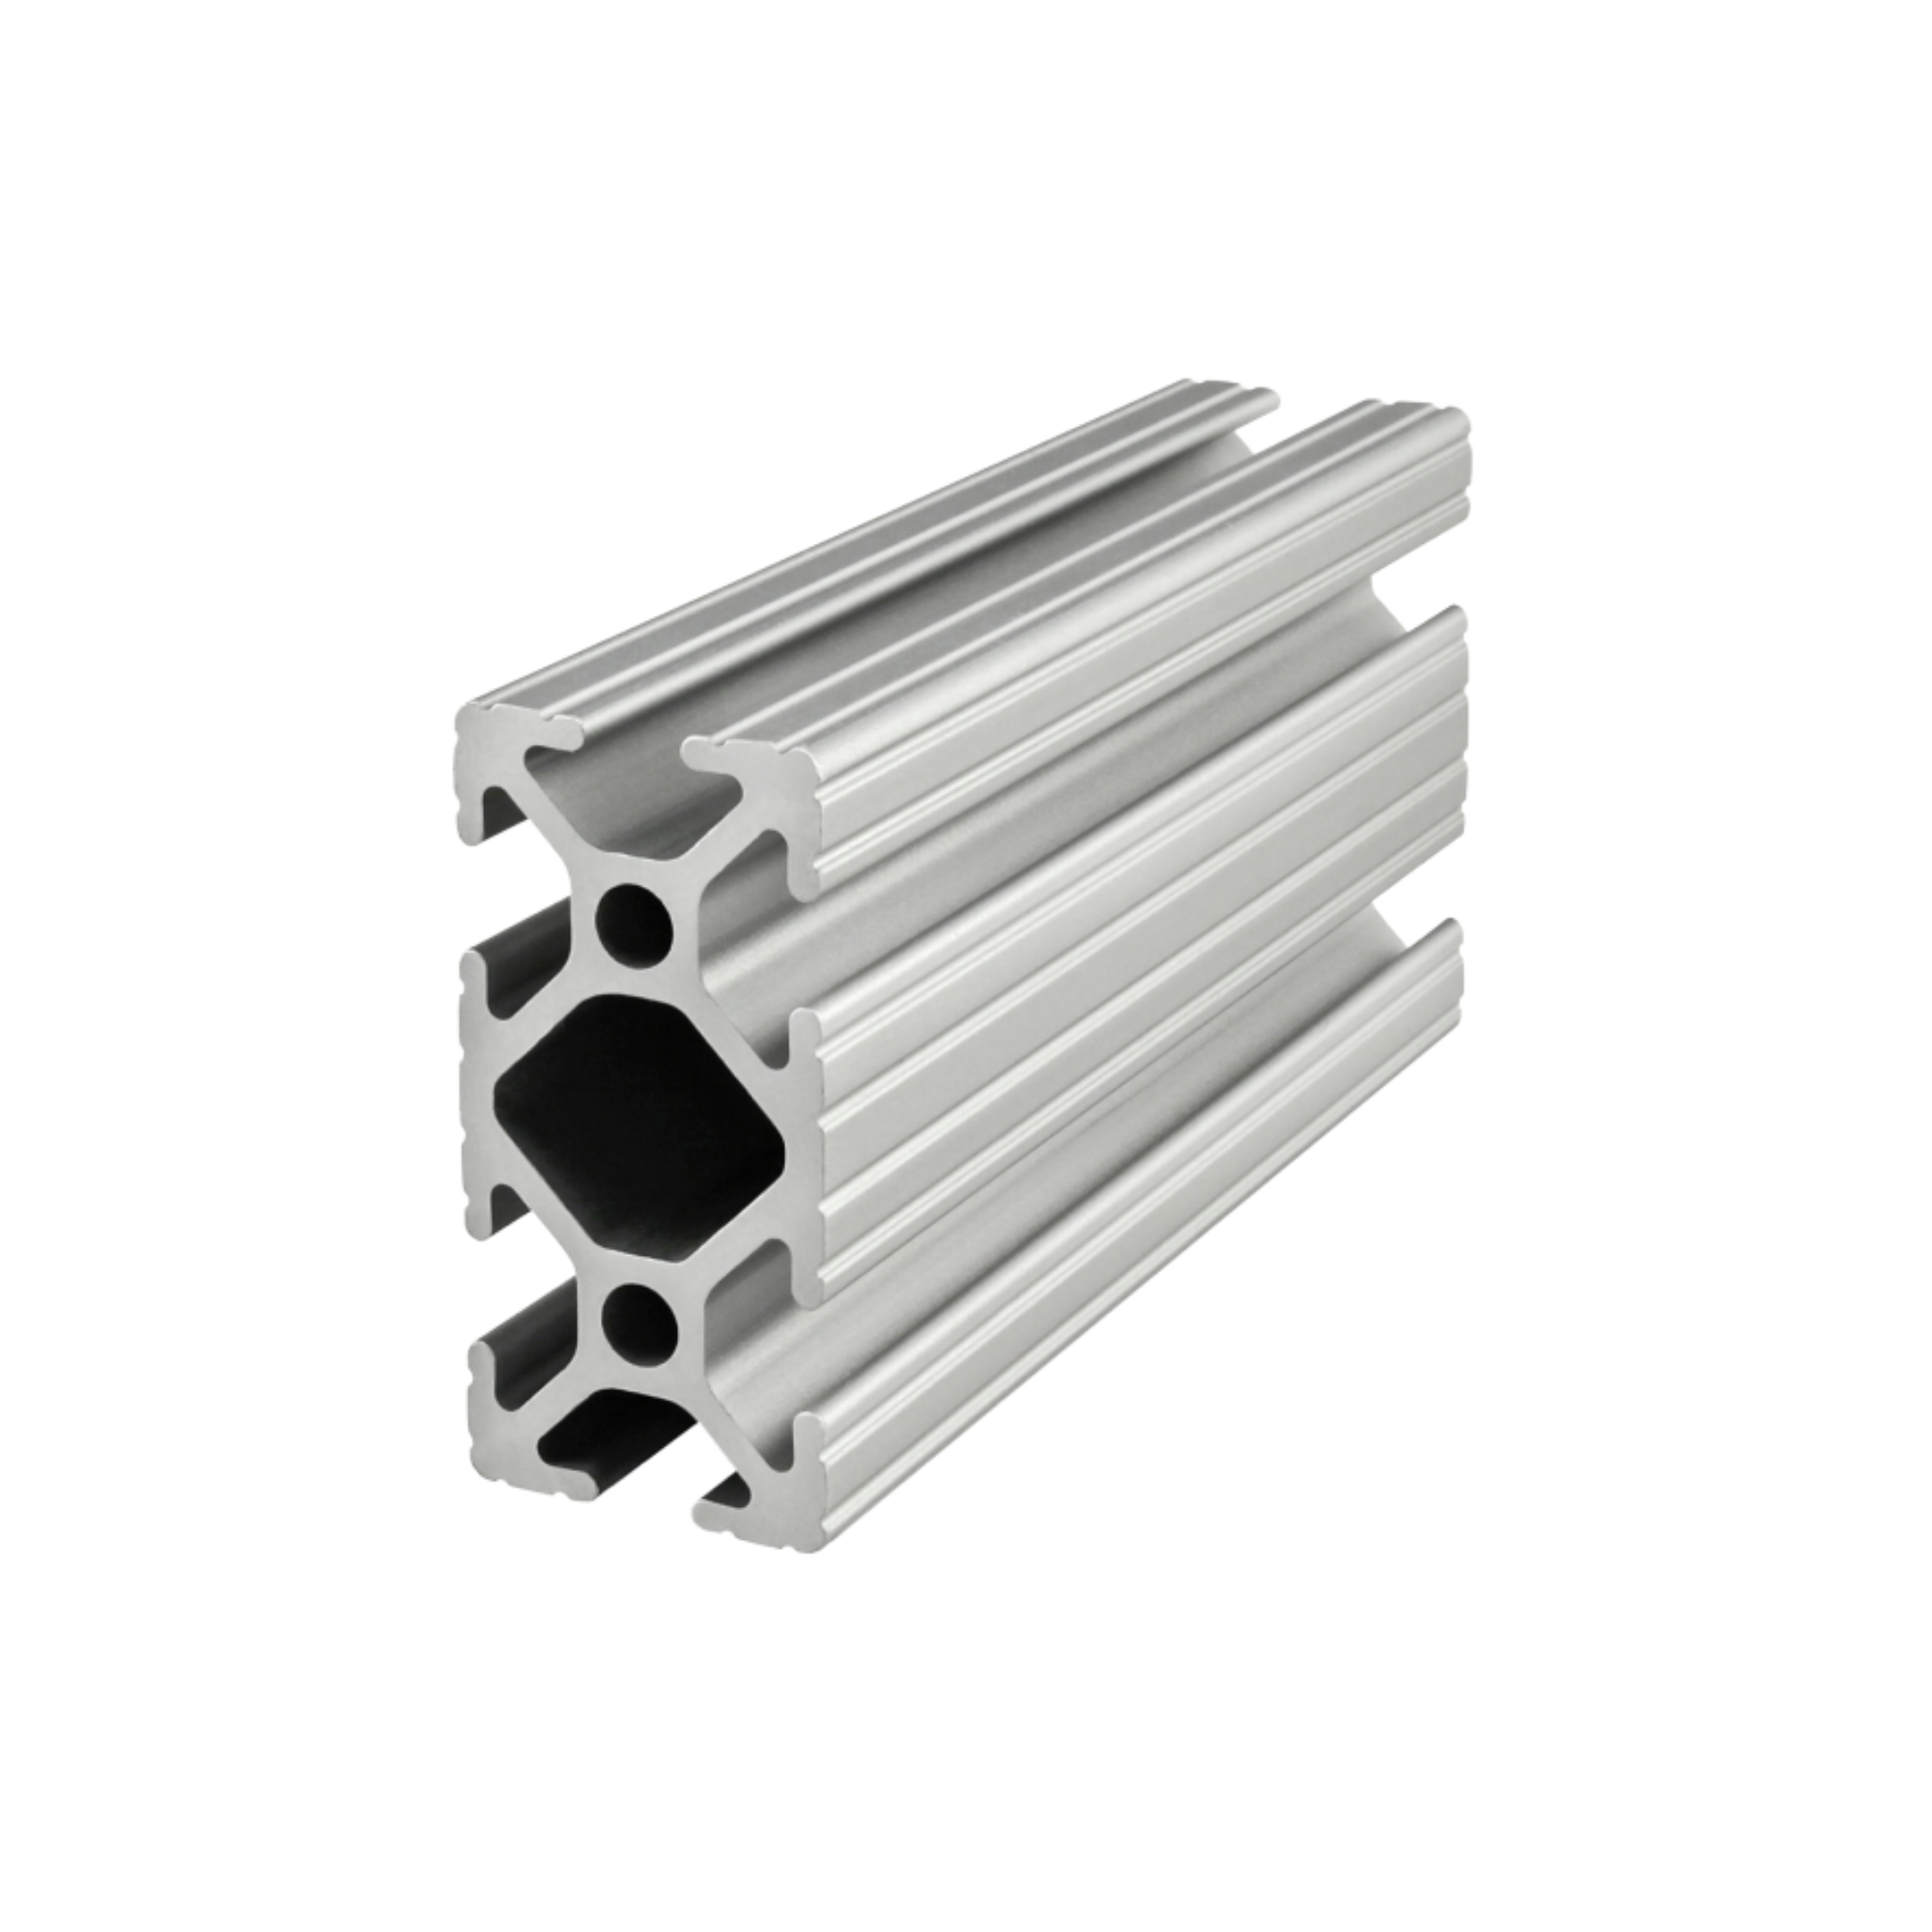 a rectangular metal bar with squared corners, two T-slots on each long side, and a single T-slot on each short side